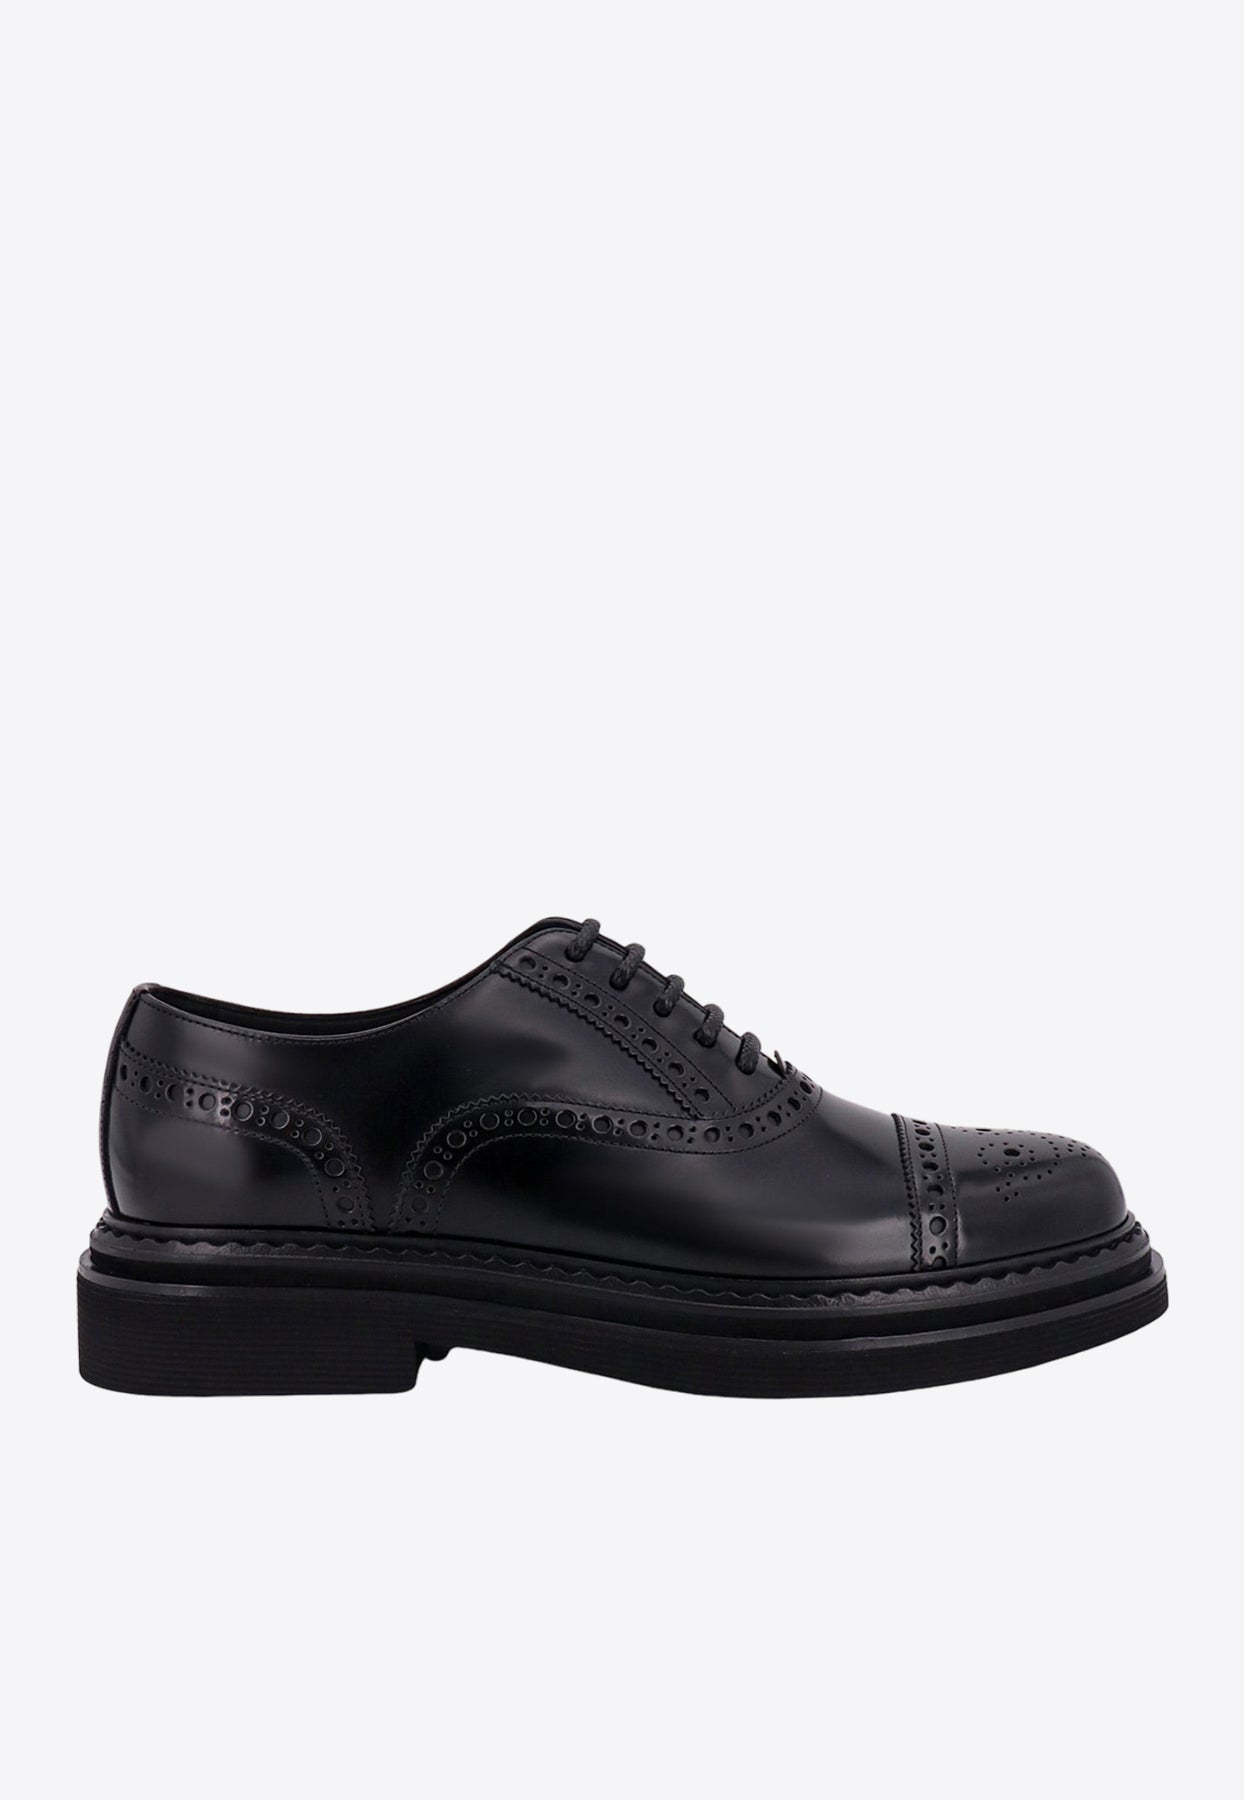 Dolce & Gabbana Brushed Calf Leather Oxford Shoes In Black